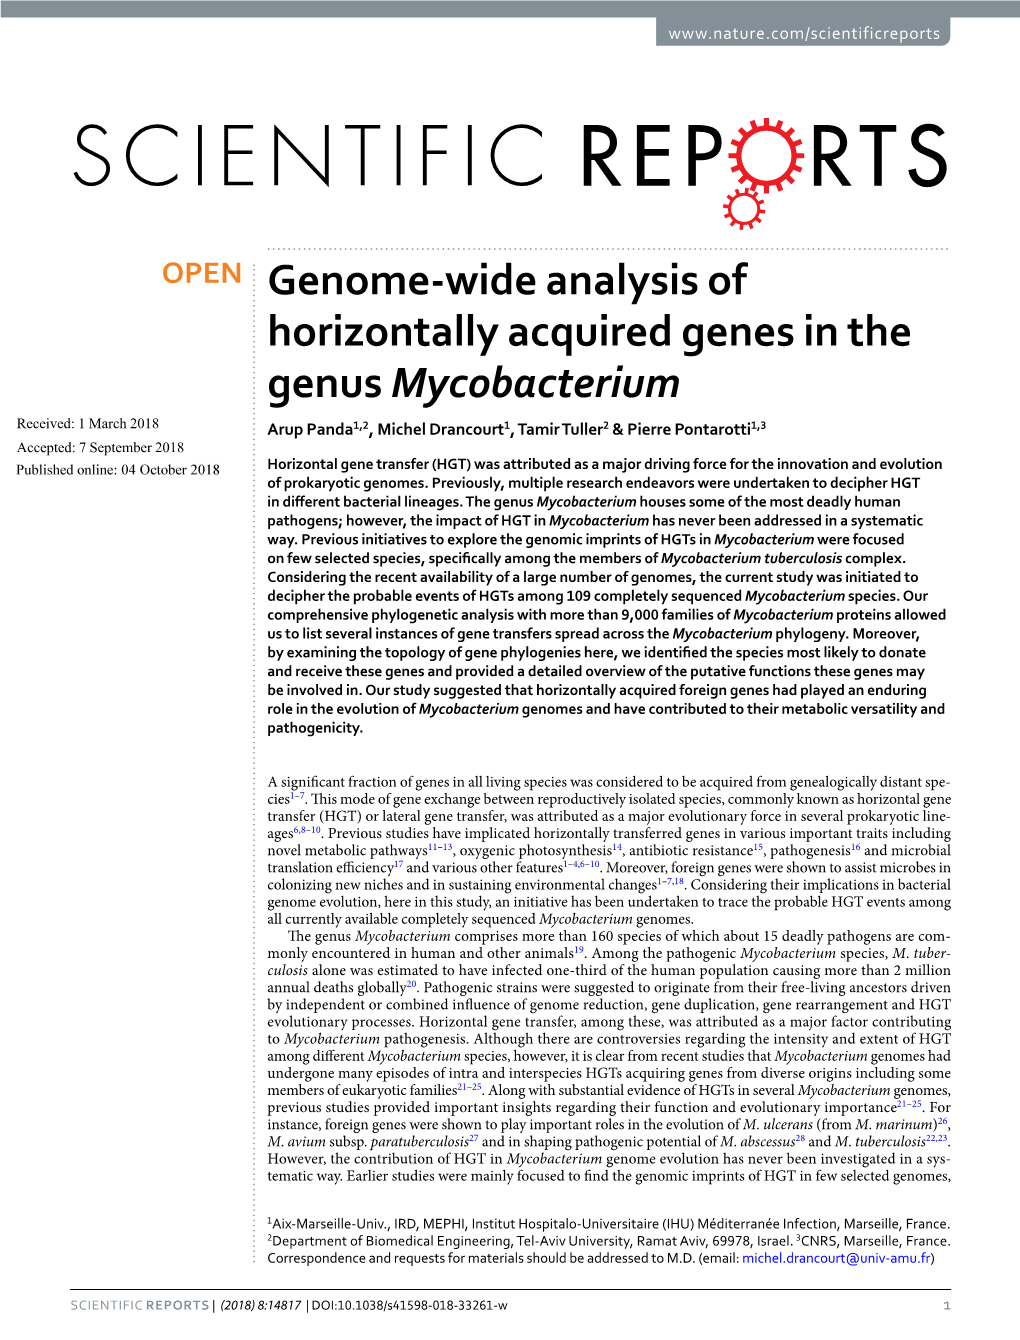 Genome-Wide Analysis of Horizontally Acquired Genes in the Genus